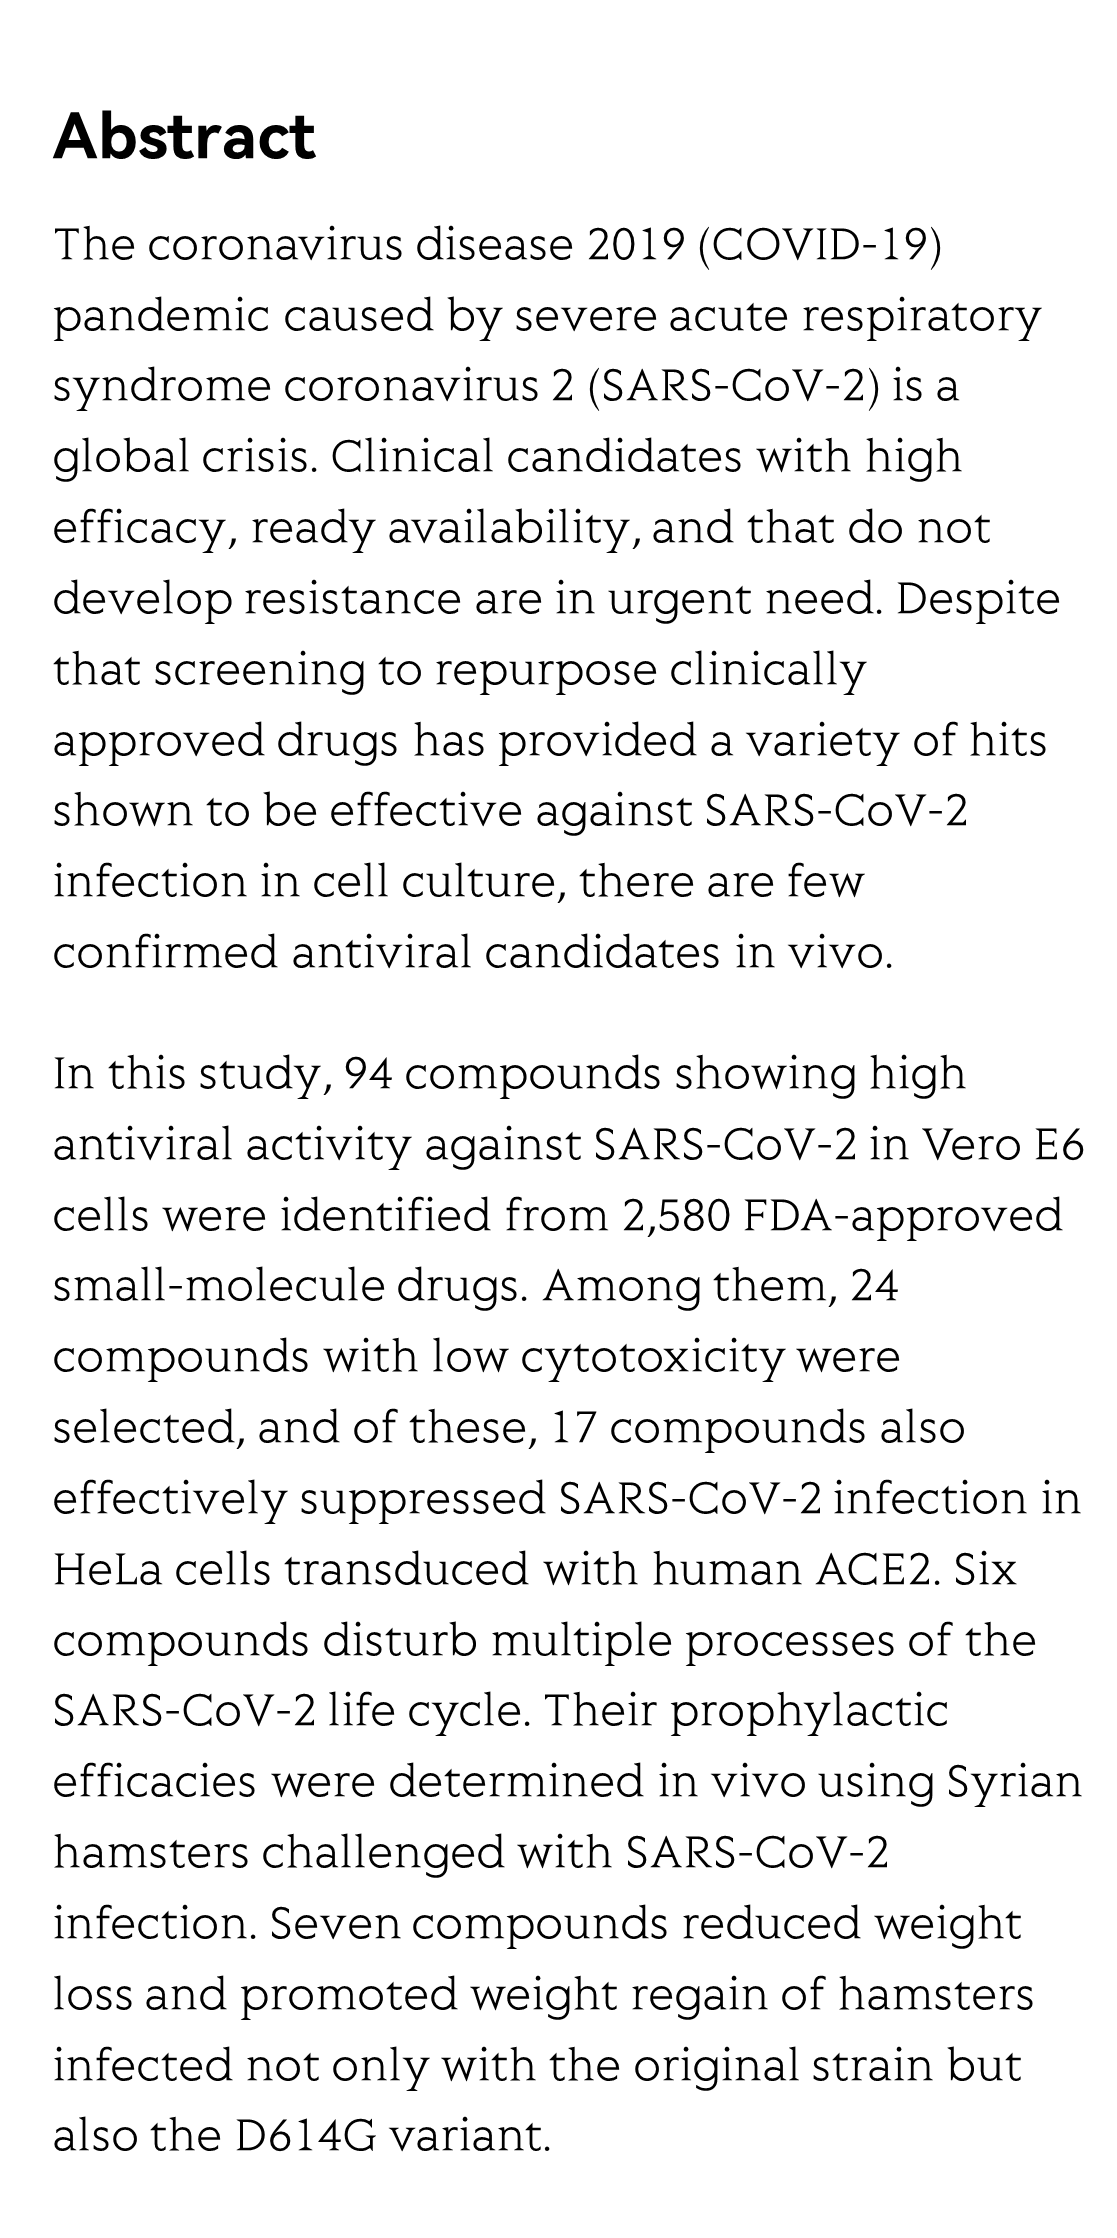 Discovery of potential anti-SARS-CoV-2 drugs based on large-scale screening in vitro and effect evaluation in vivo_2